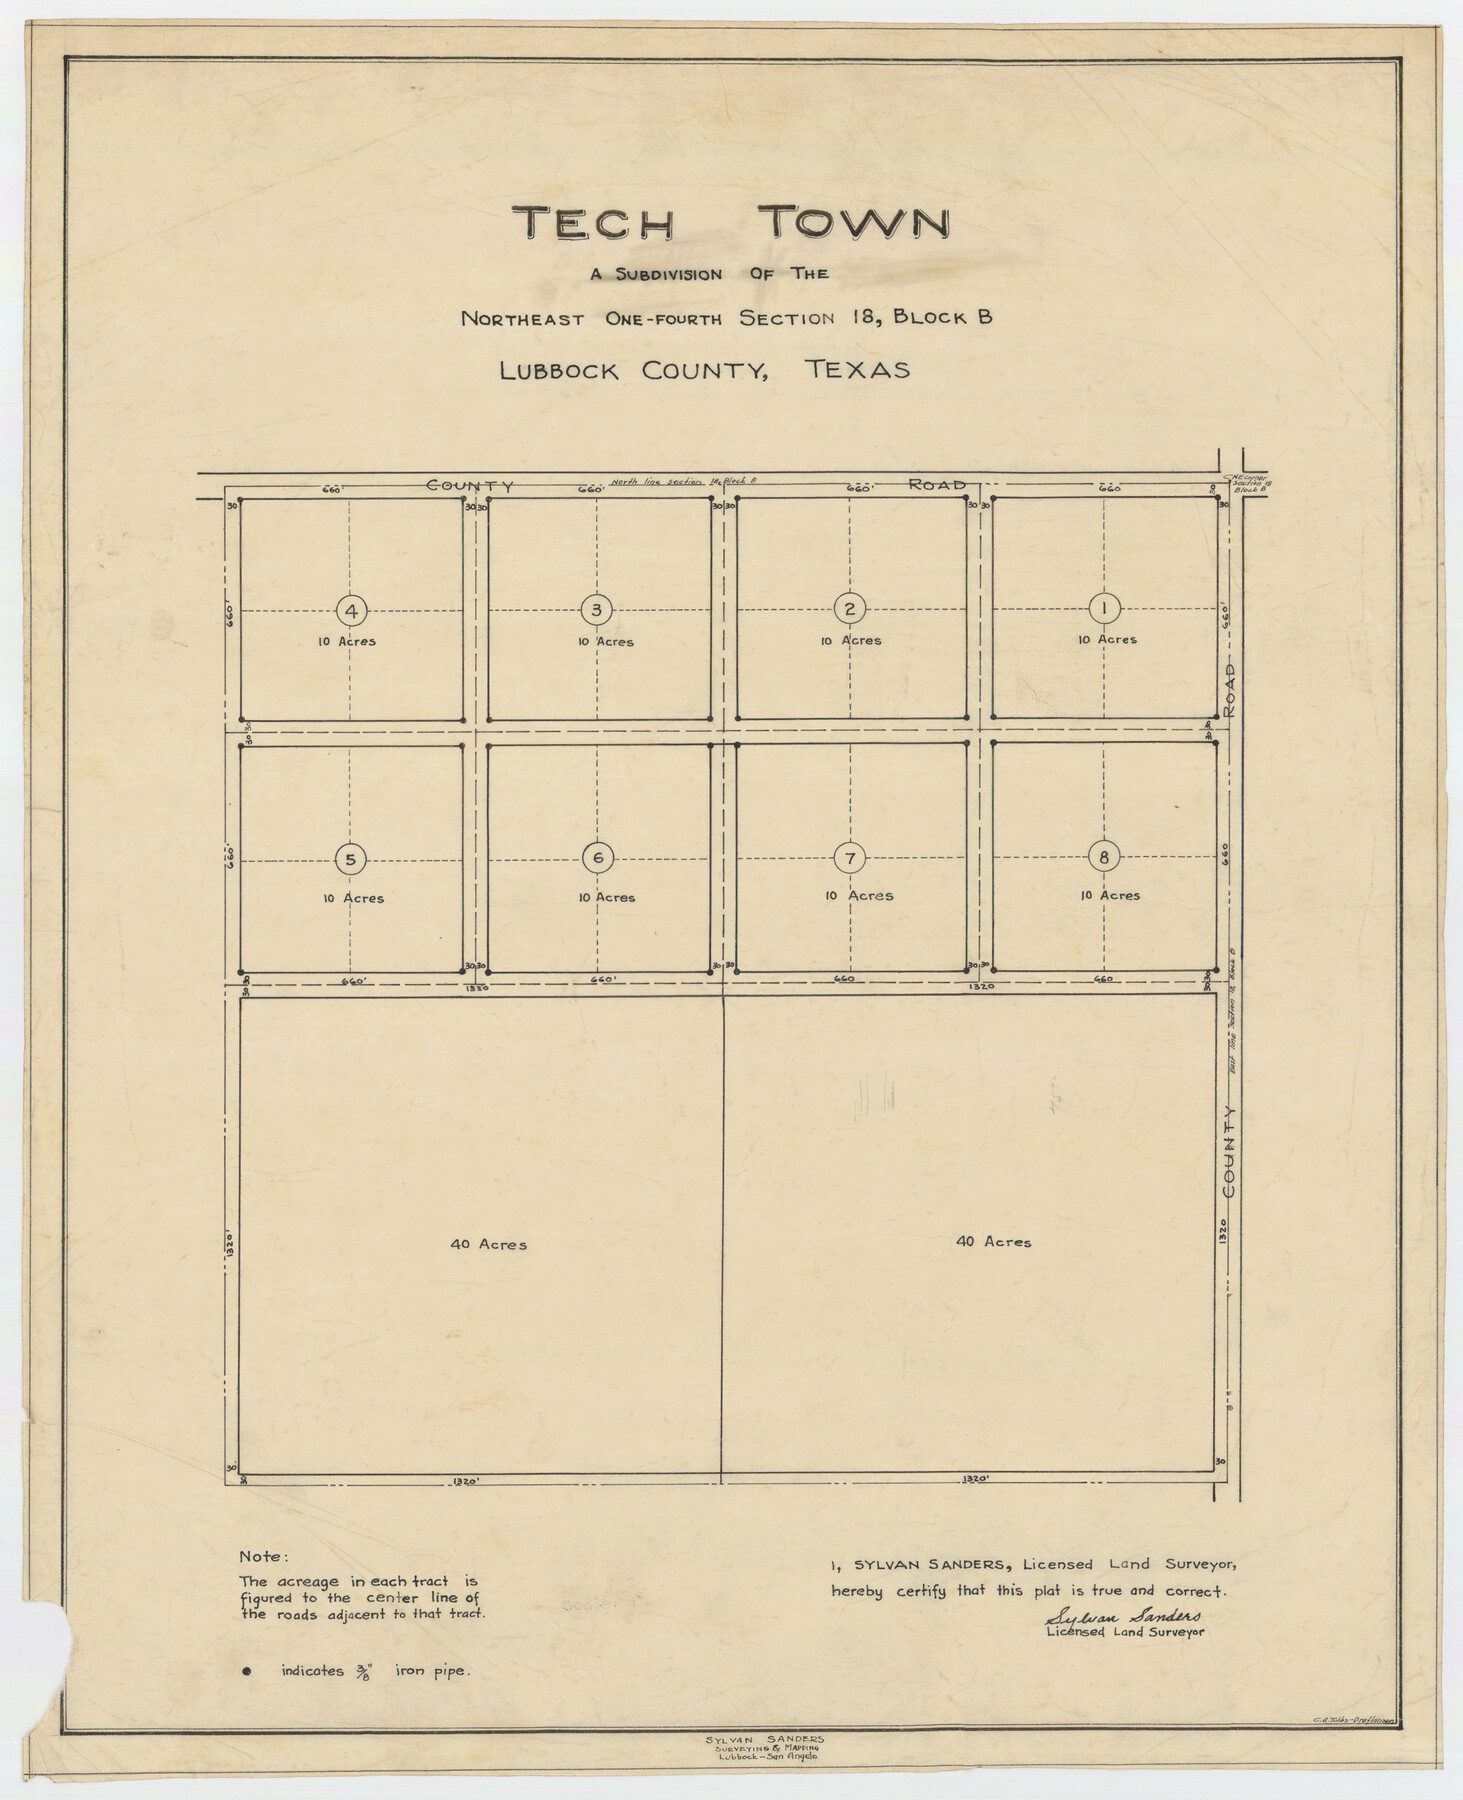 92792, Tech Town a Subdivision of the Northeast Quarter Section 18, Block B, Twichell Survey Records